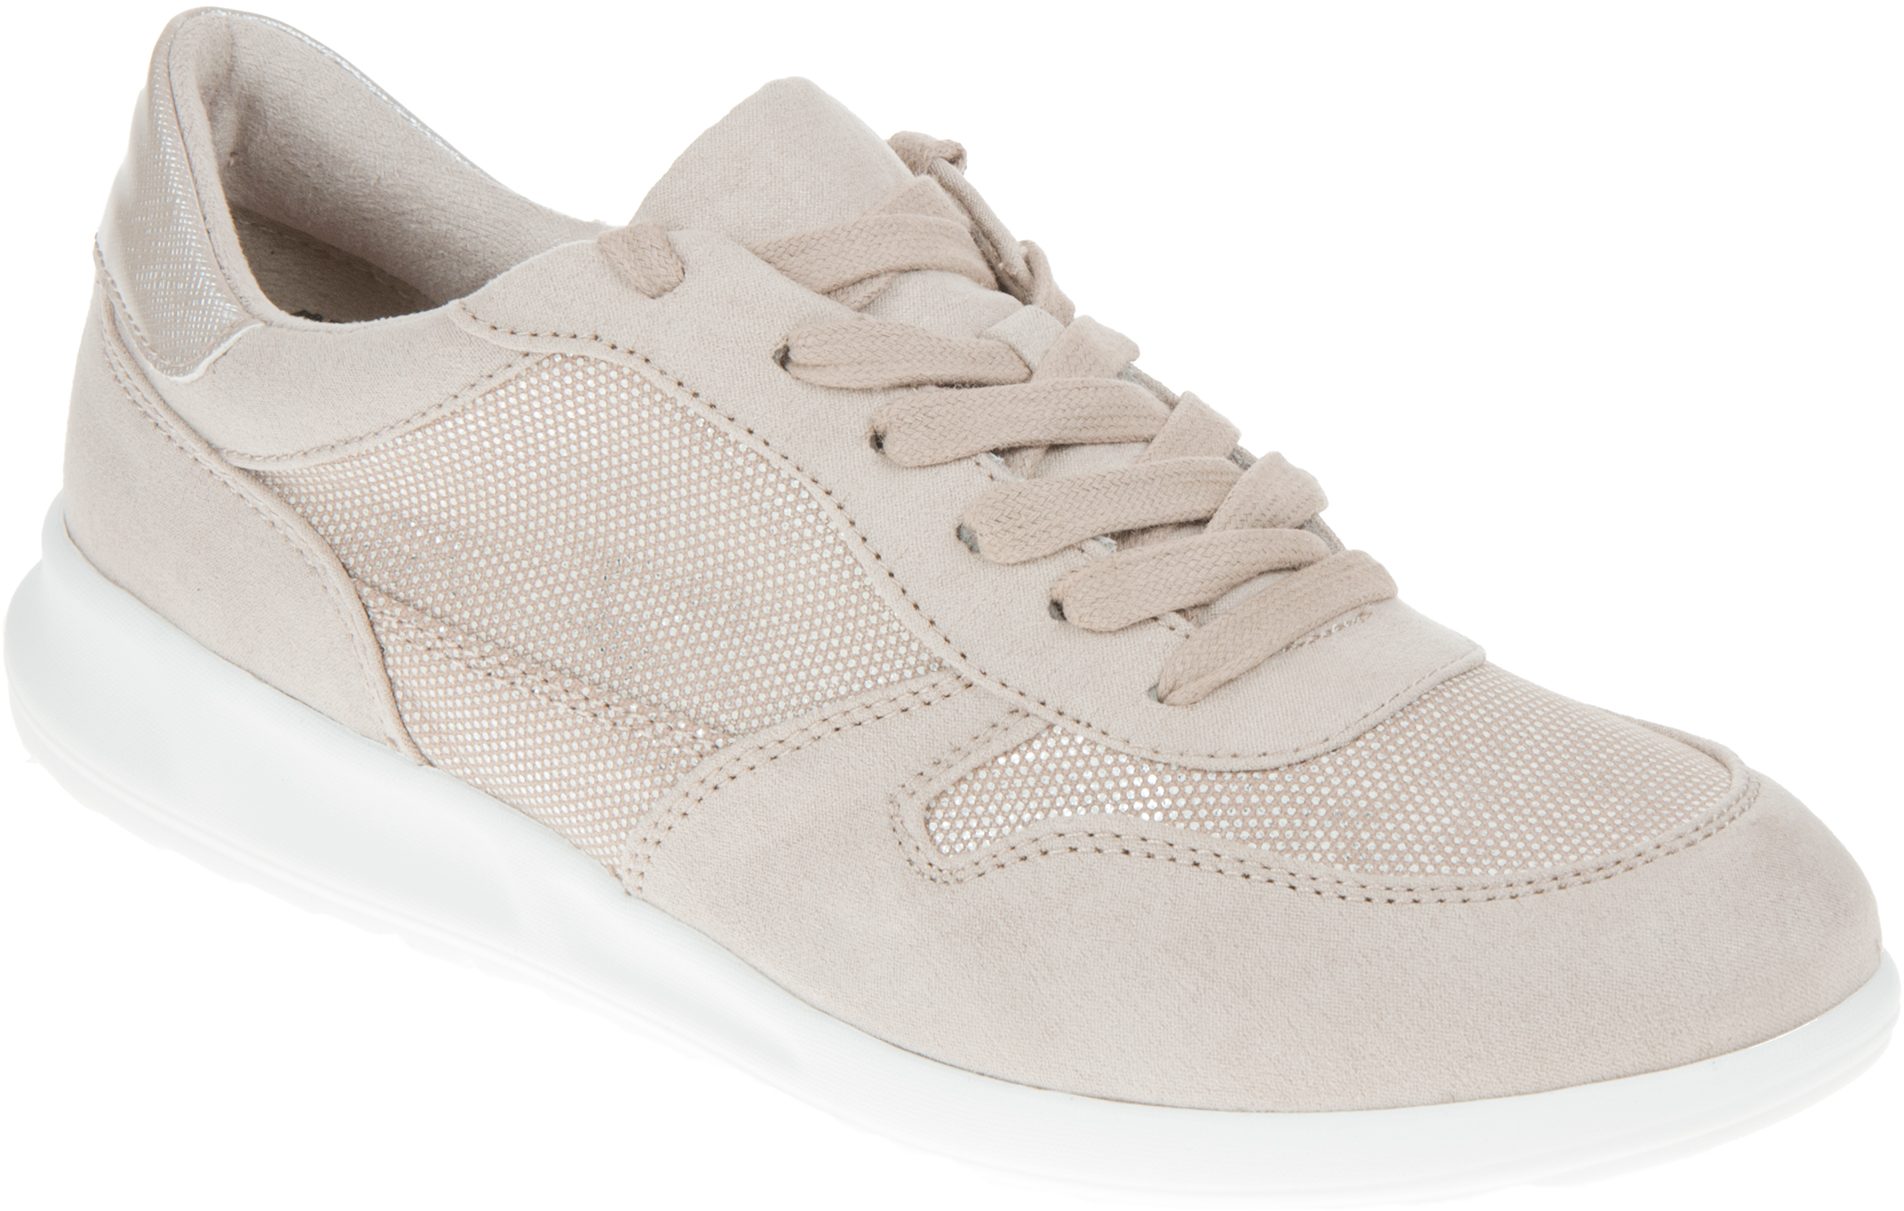 Tamaris Daralis Ivory 23625-20 458 - Everyday Shoes - Humphries Shoes